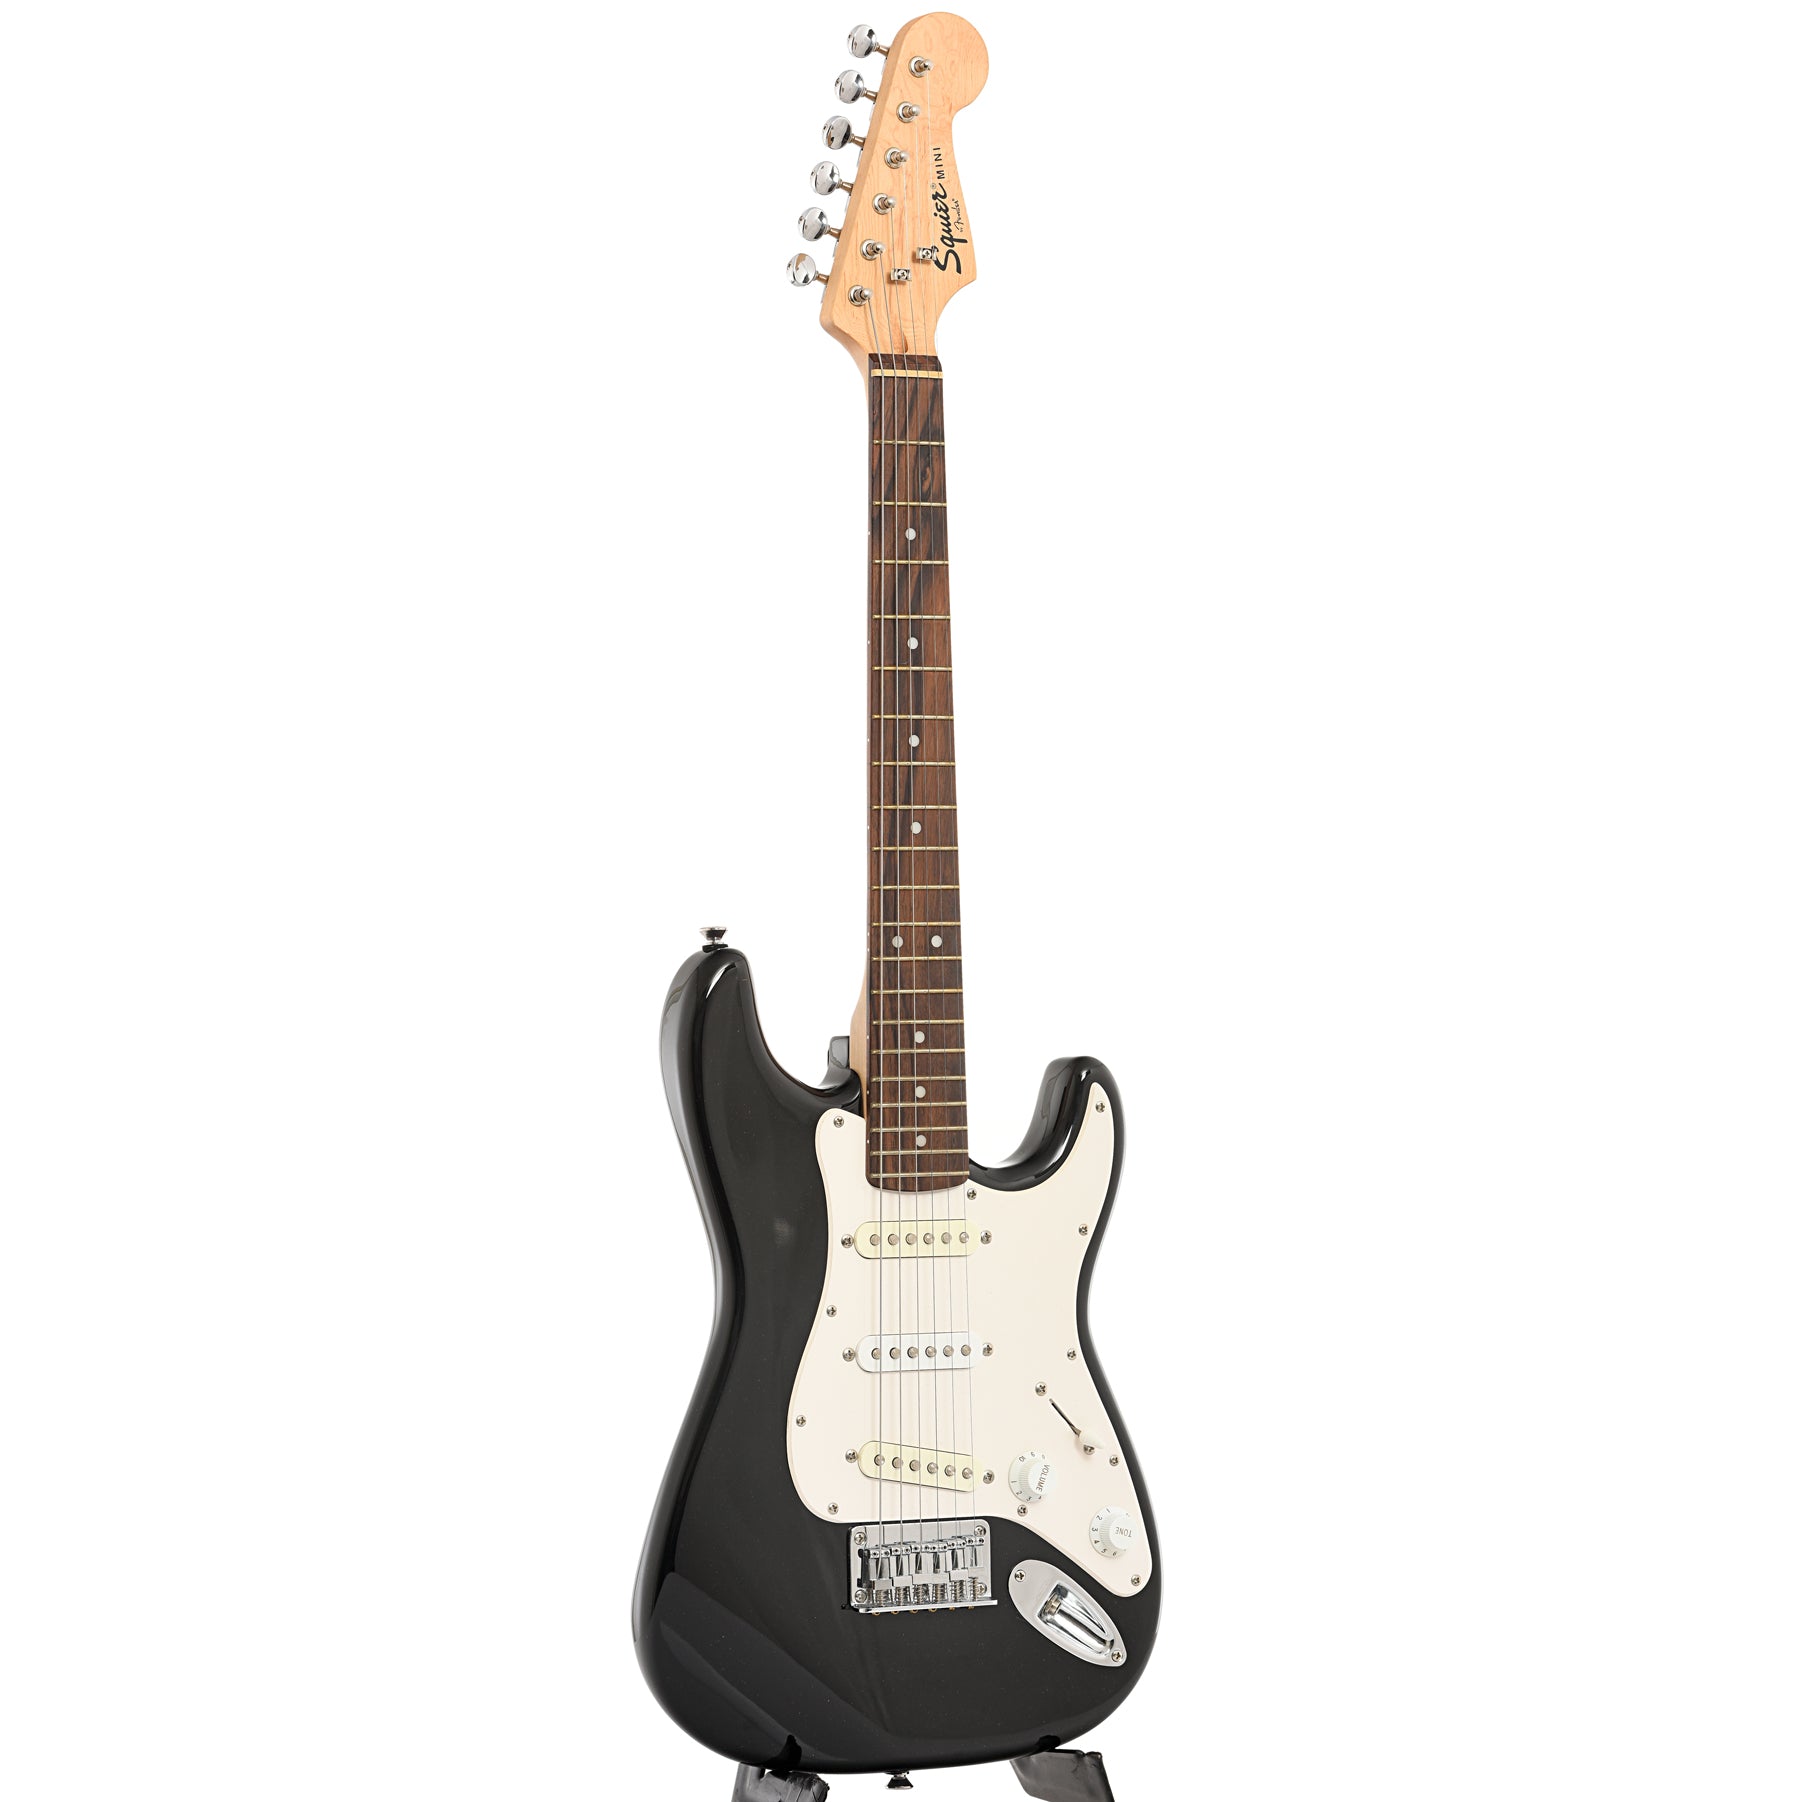 Full and side of Squier Mini Stratocaster Electric Guitar (2016)